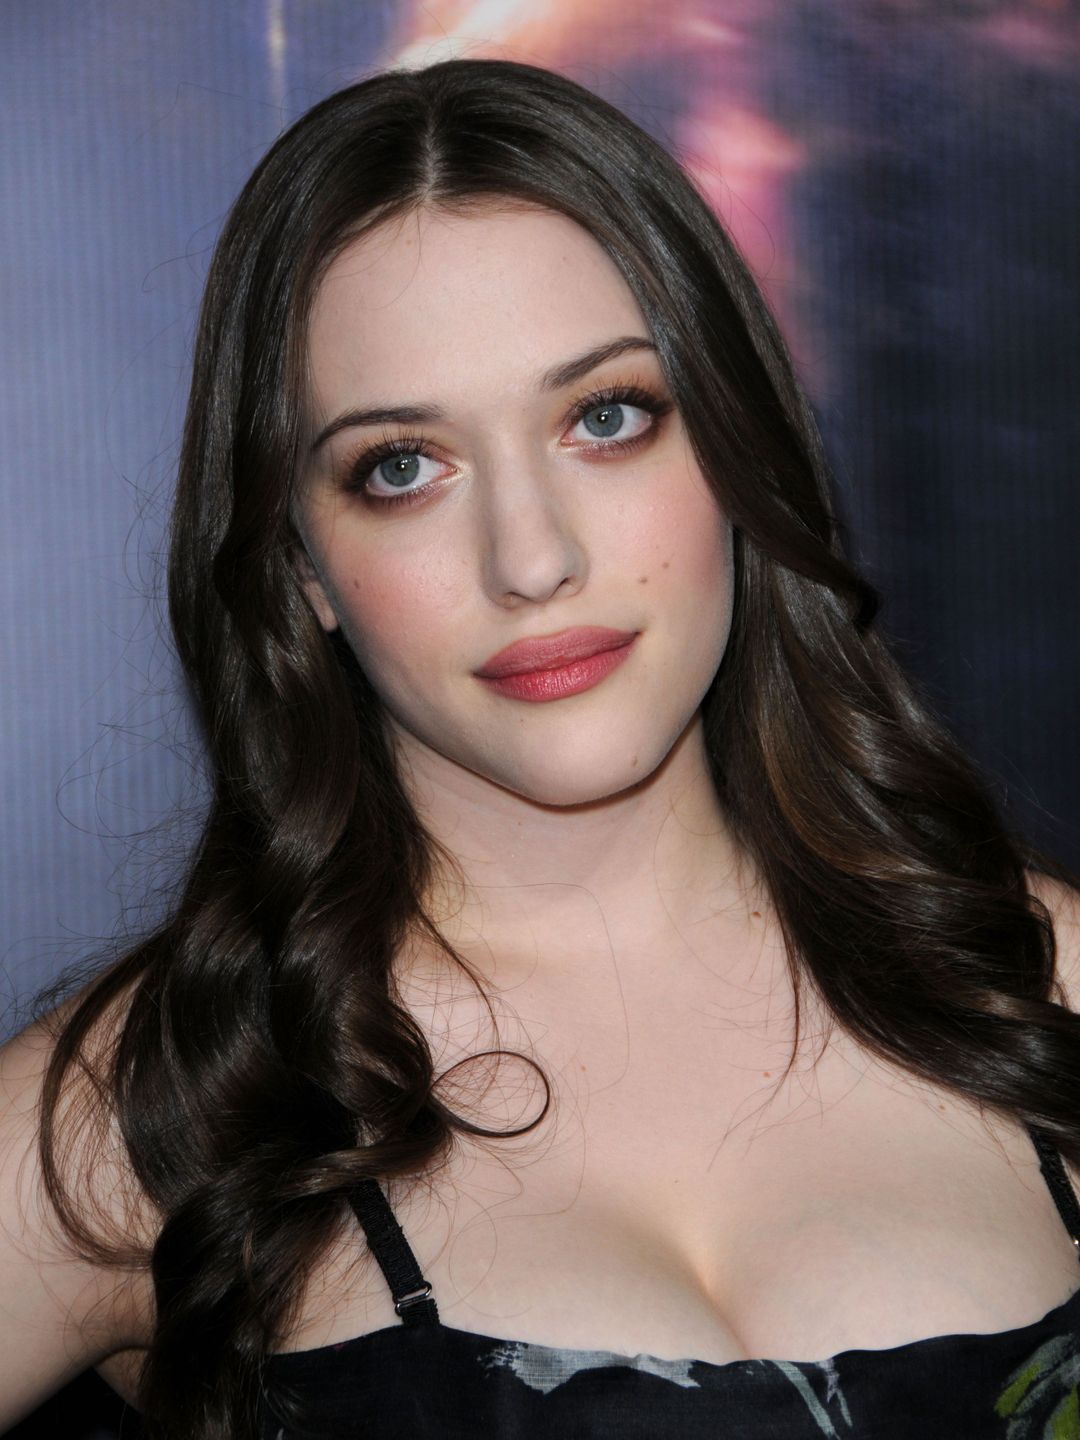 Kat Dennings how did she became famous